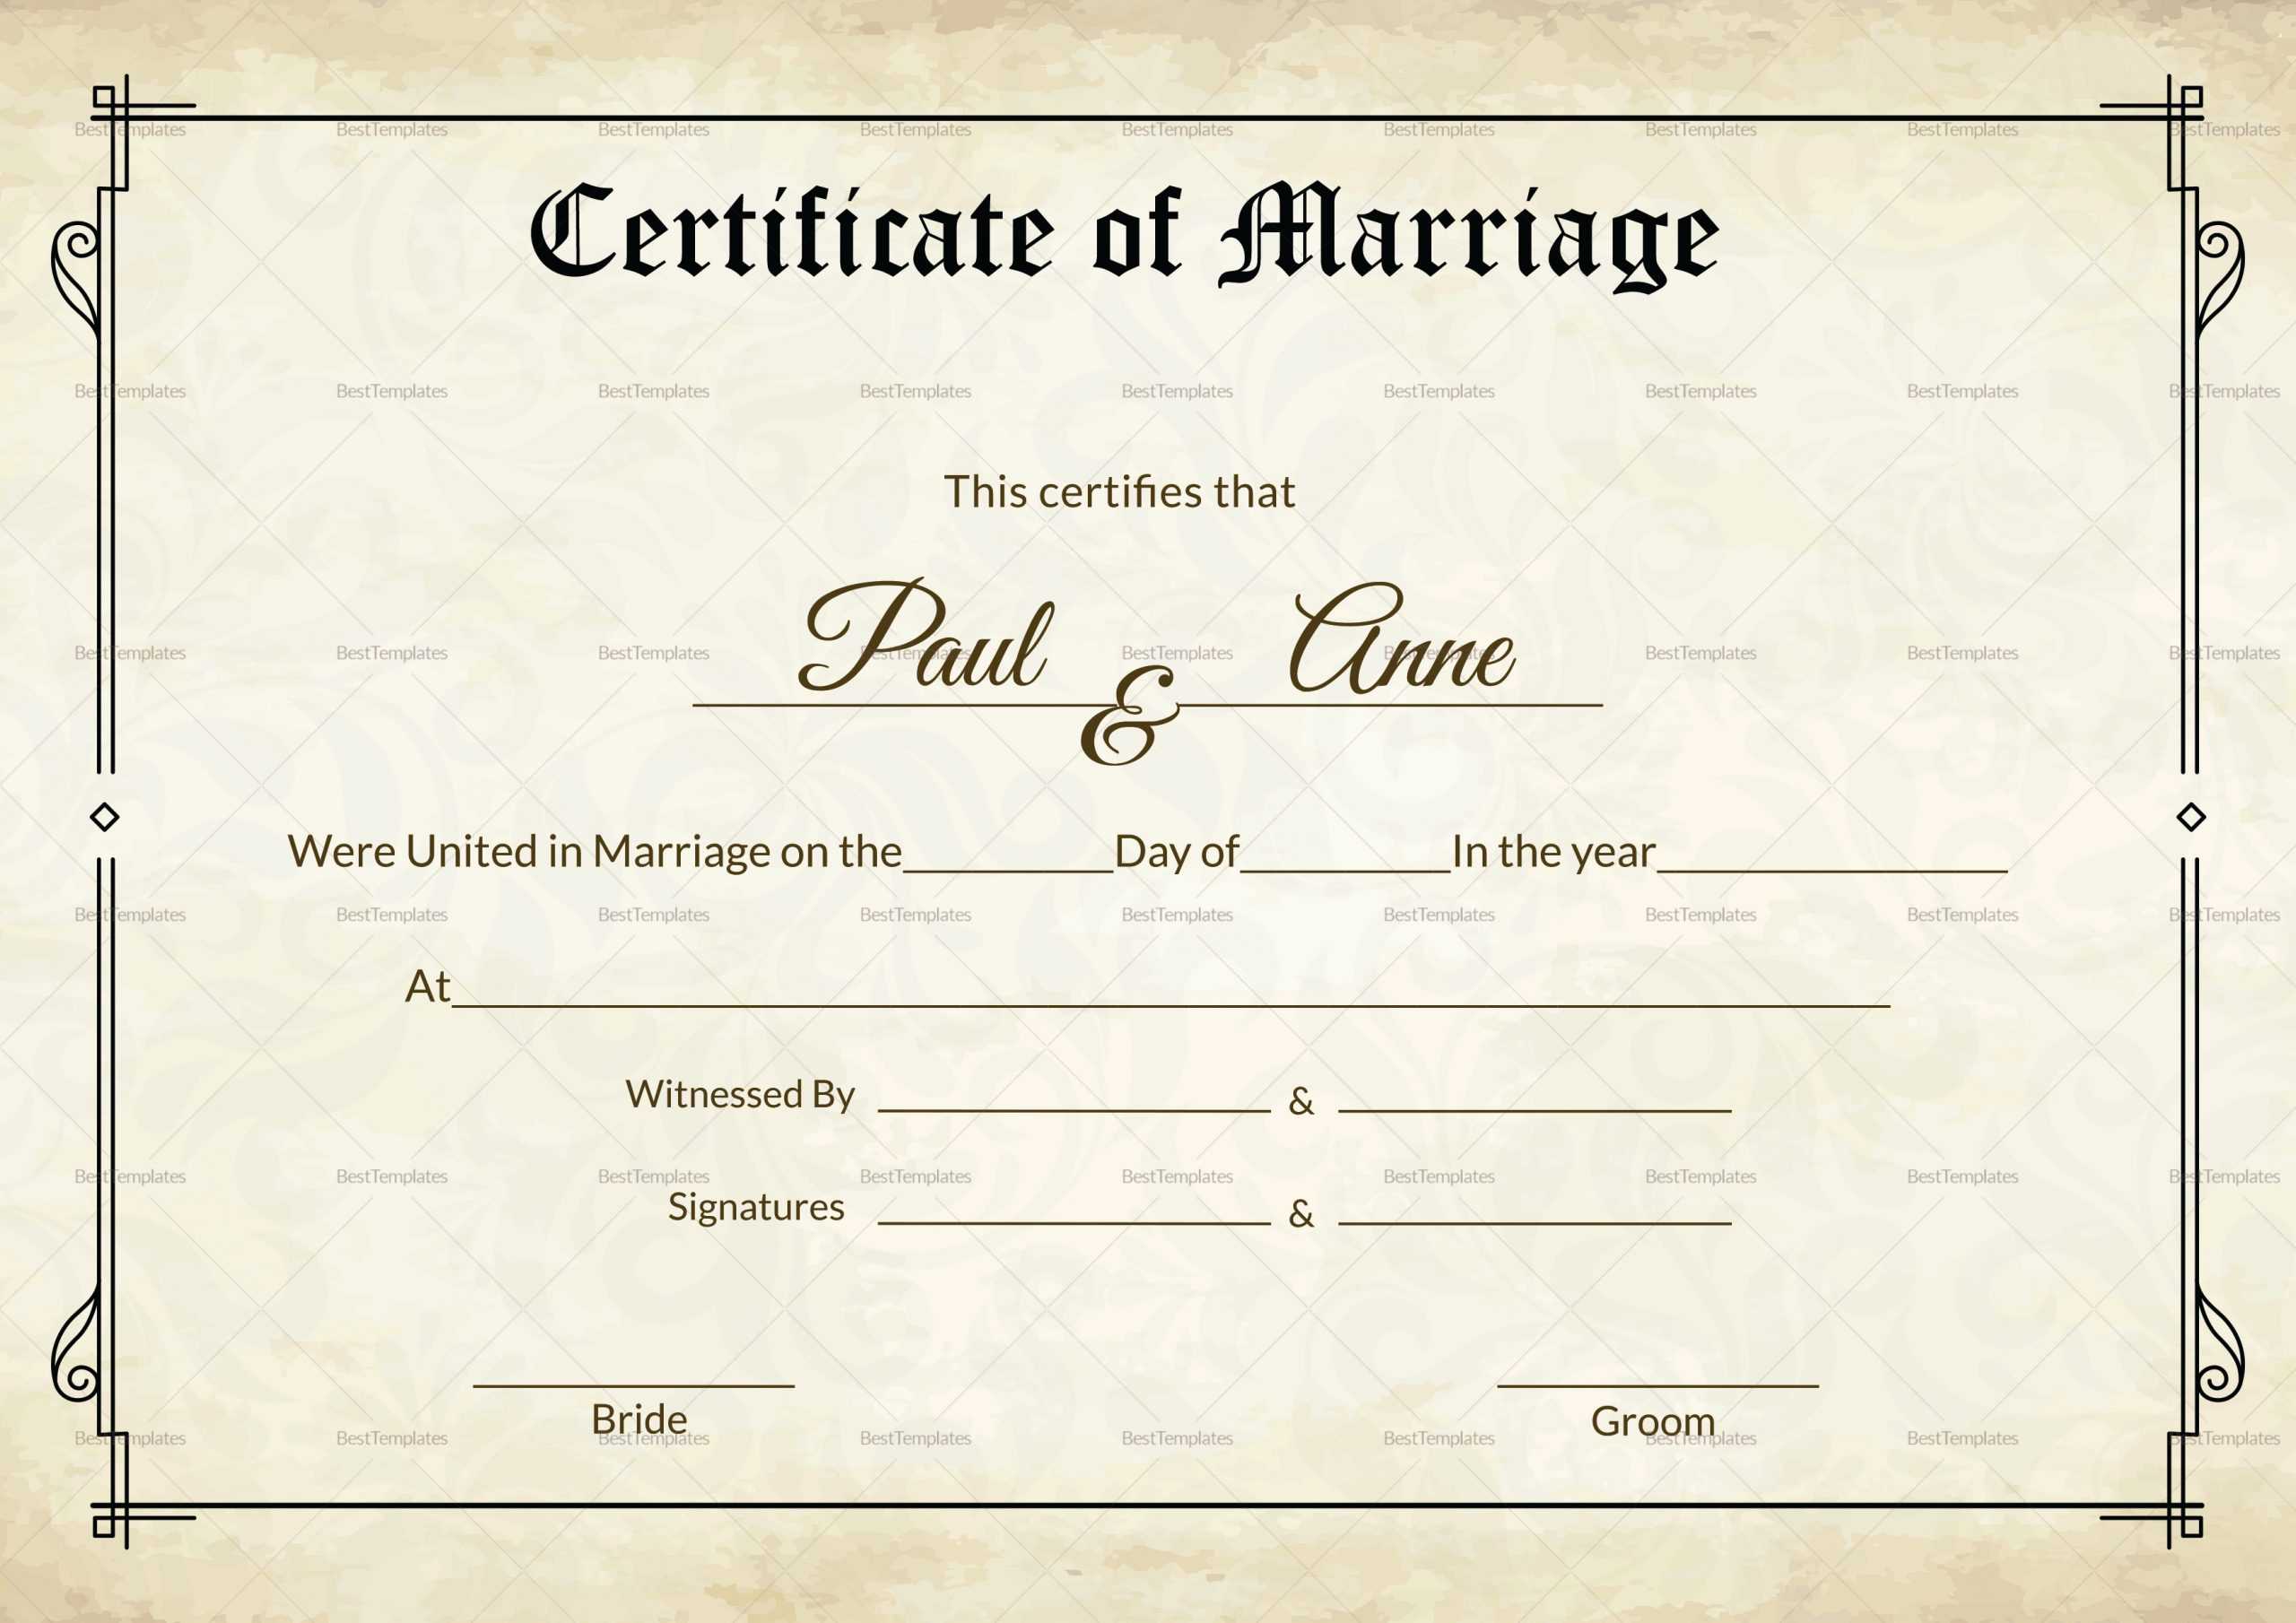 Marriage Certificate Template Keepsake Wedding Sample South Throughout Certificate Of Marriage Template